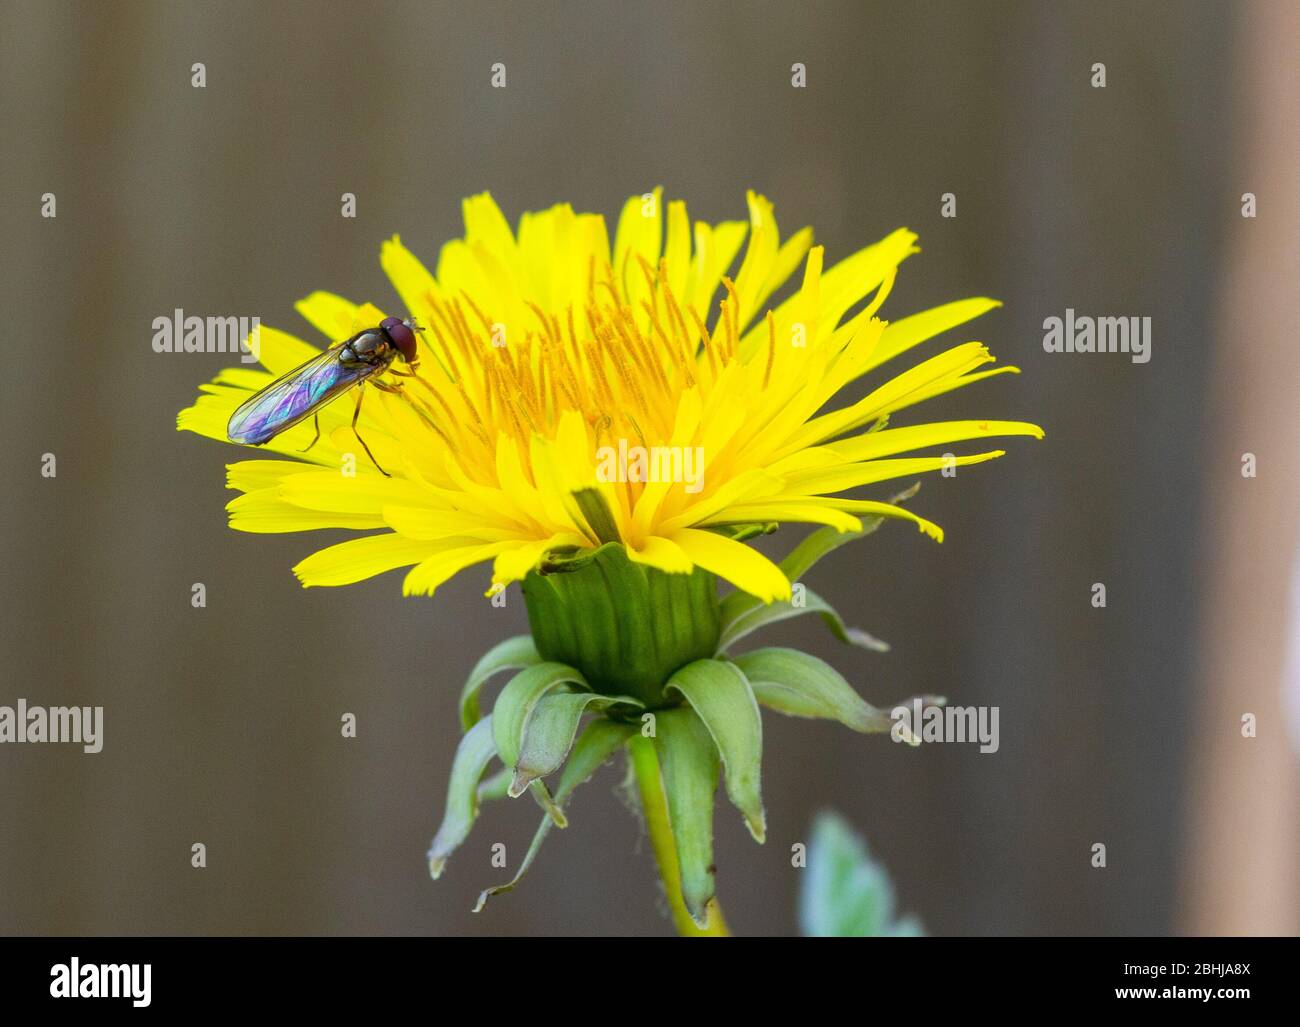 Male Platycheirus sp hoverfly on dandelion Stock Photo